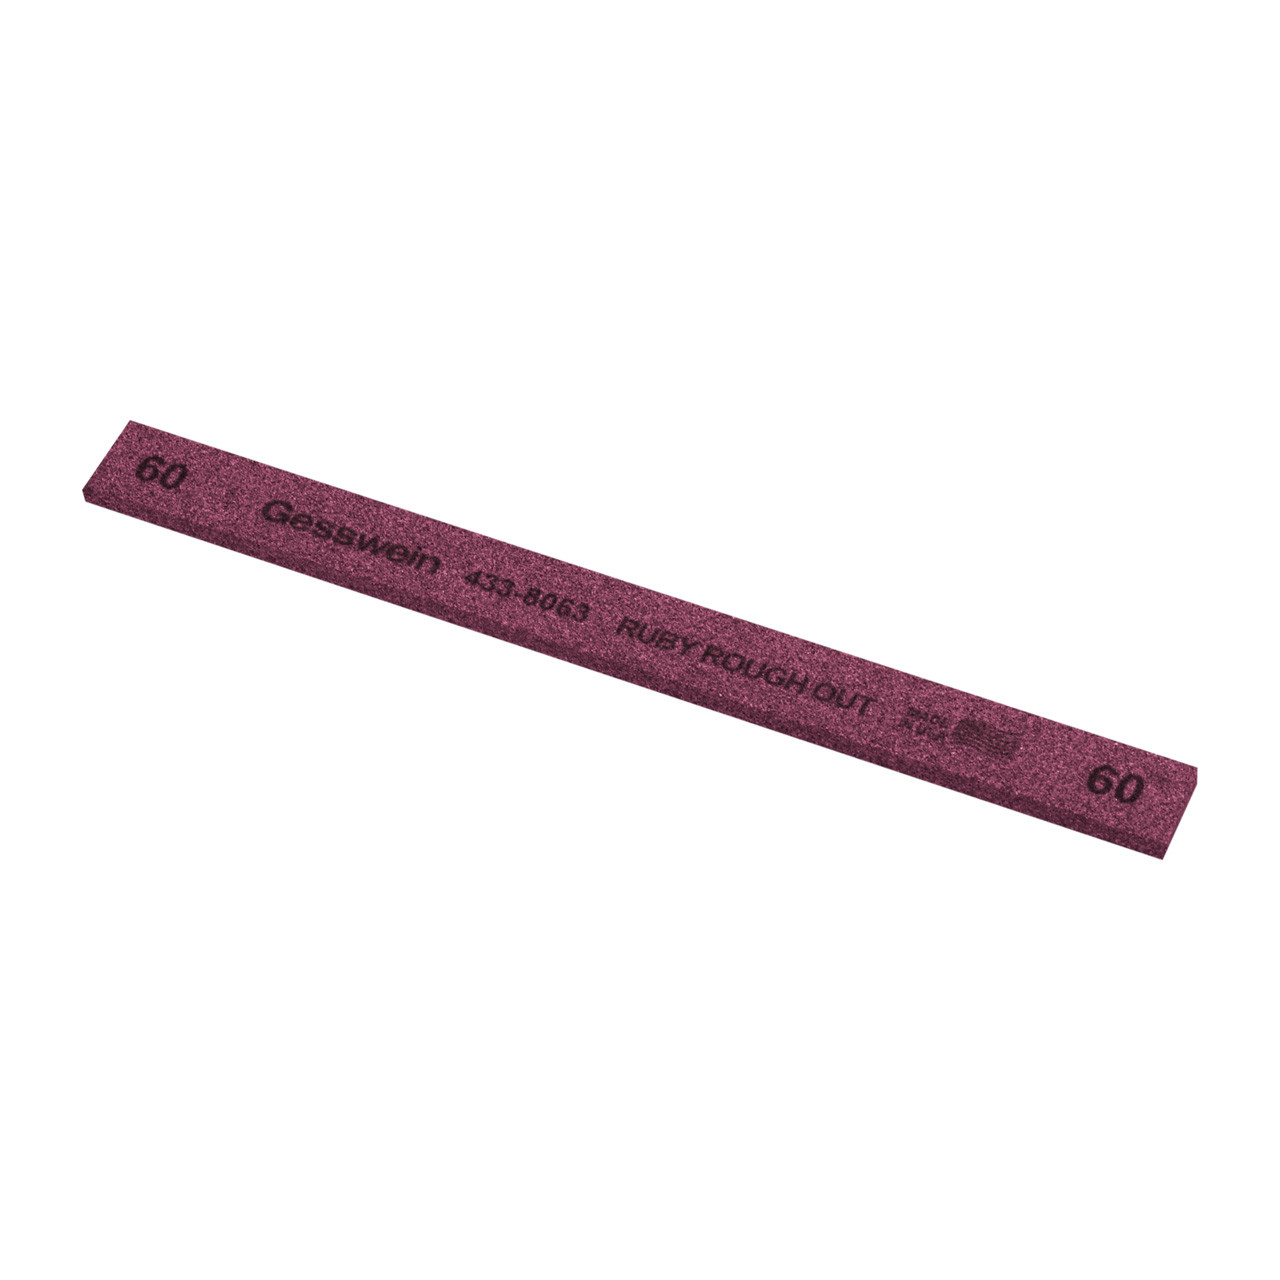 Gesswein® Ruby Rough Out Stone - 1/2" x 1/8" x 6", 60 Grit  (Pkg. of 12)